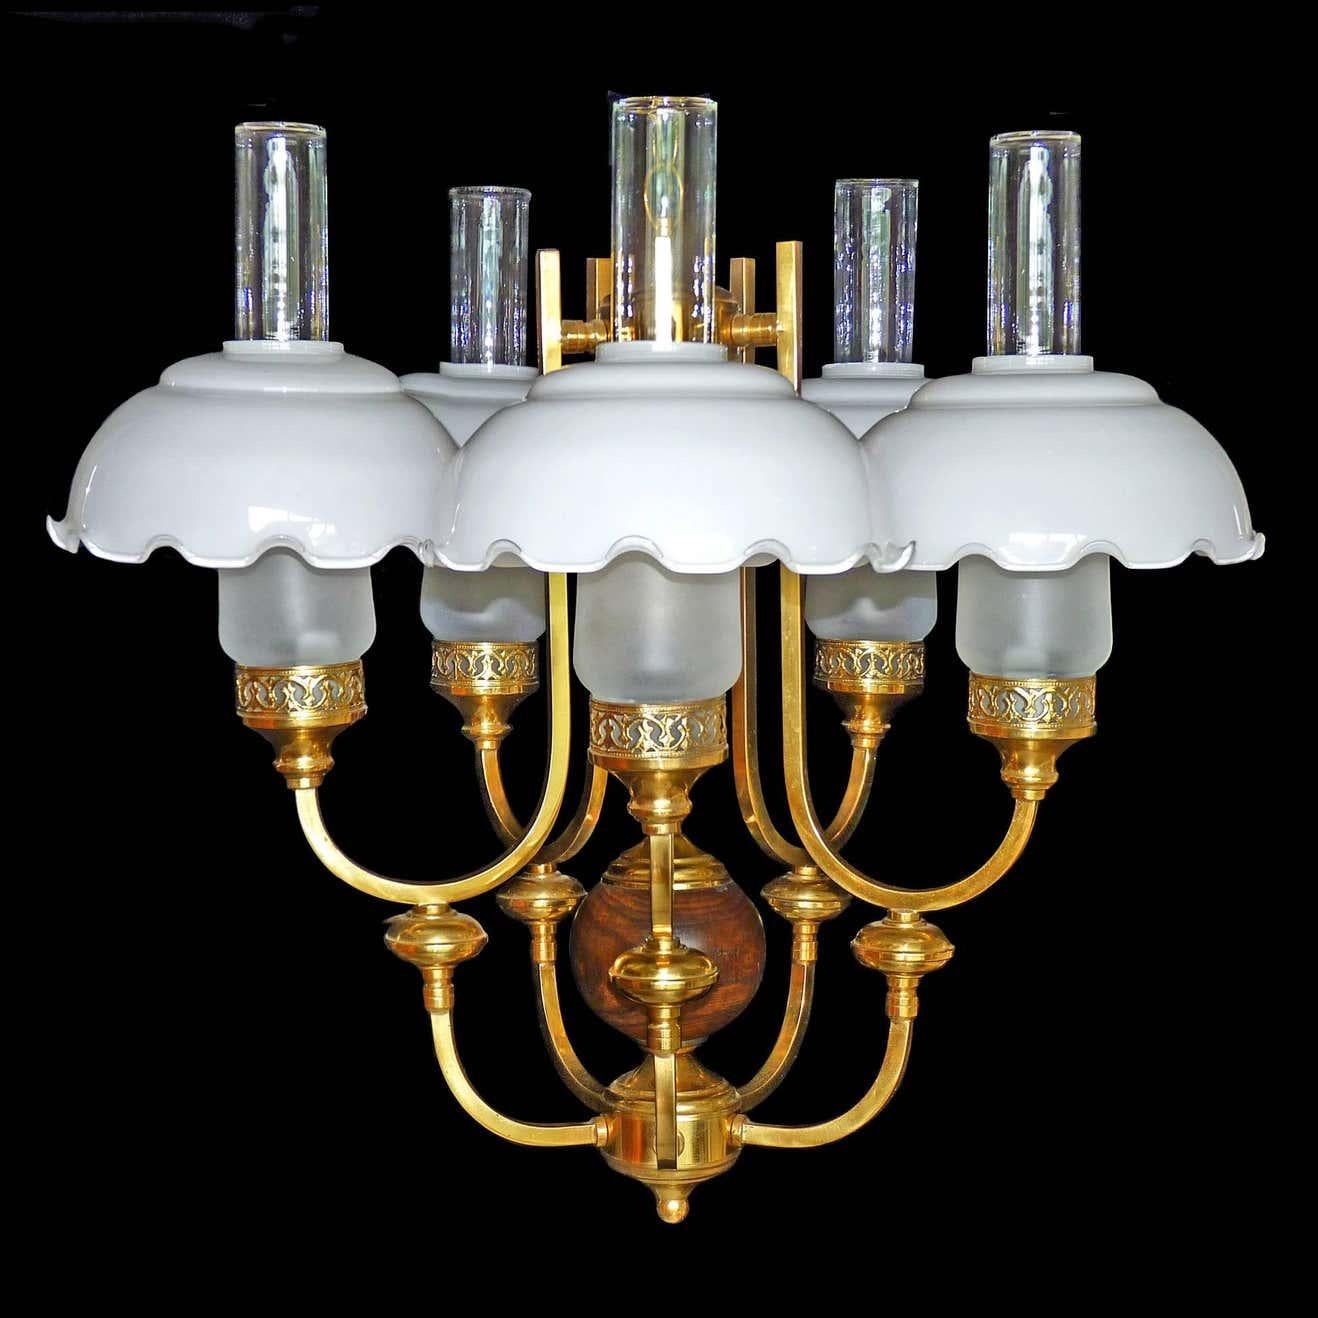 Gorgeous French Art Deco in Colonial style chandelier, gilt brass, wood and opaline glass shades
Measures:
Diameter 24 in / 60 cm
Height 36 in (20 in +12 in/chain) / 90 cm (60 cm + 30 cm/chain)
Glass shades 8 in /21 cm
Five light bulbs